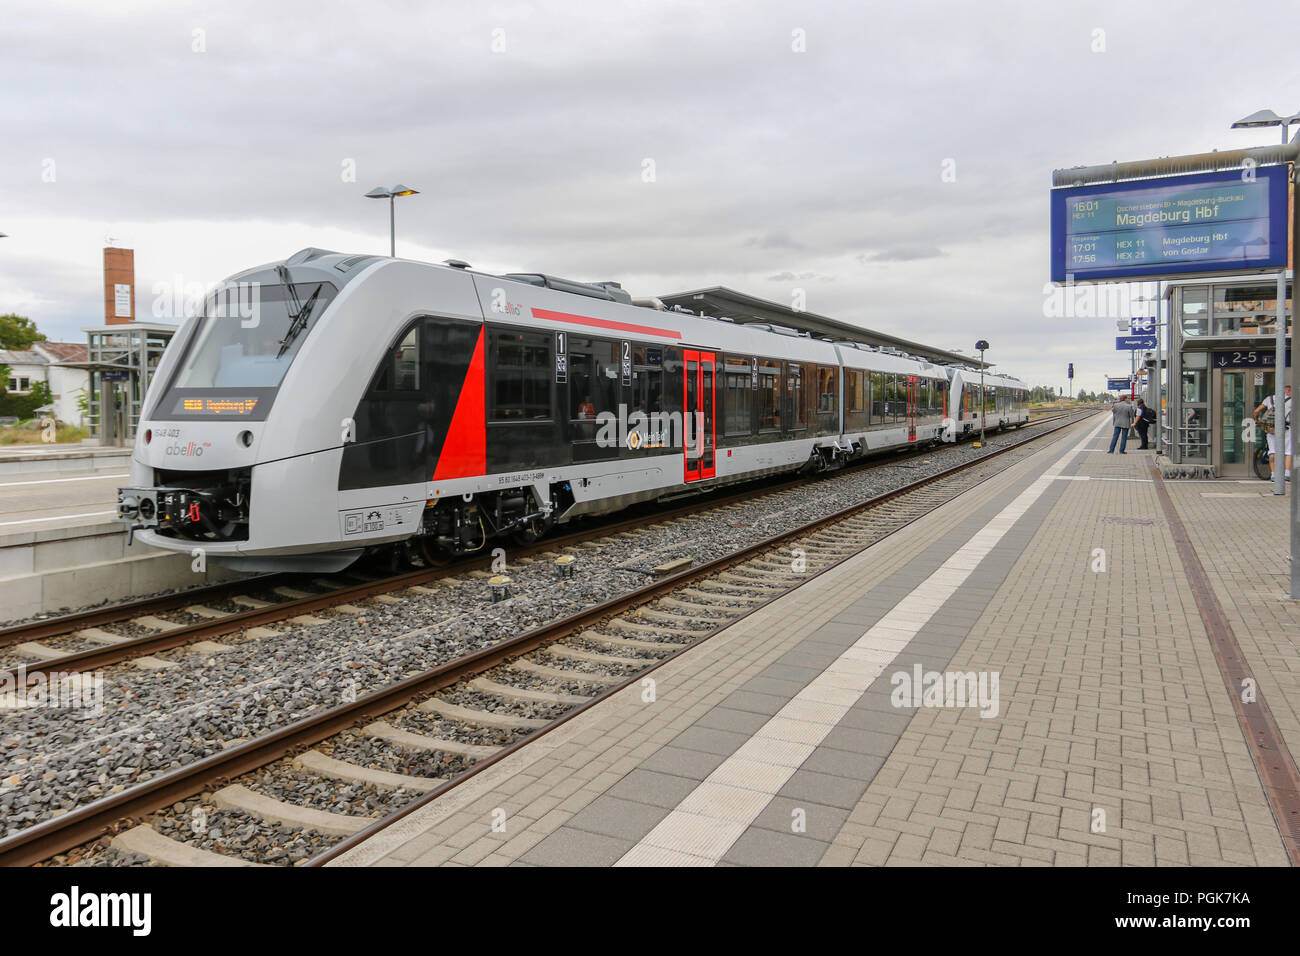 Germany, Halberstadt - 2018-08-27 - Abellio Central Germany presented on 27 August 2018, the new Coradia Lint 41 vehicles for the diesel network Saxony-Anhalt. The vehicles have a particularly comfortable interior and are barrier-free accessible. Stock Photo